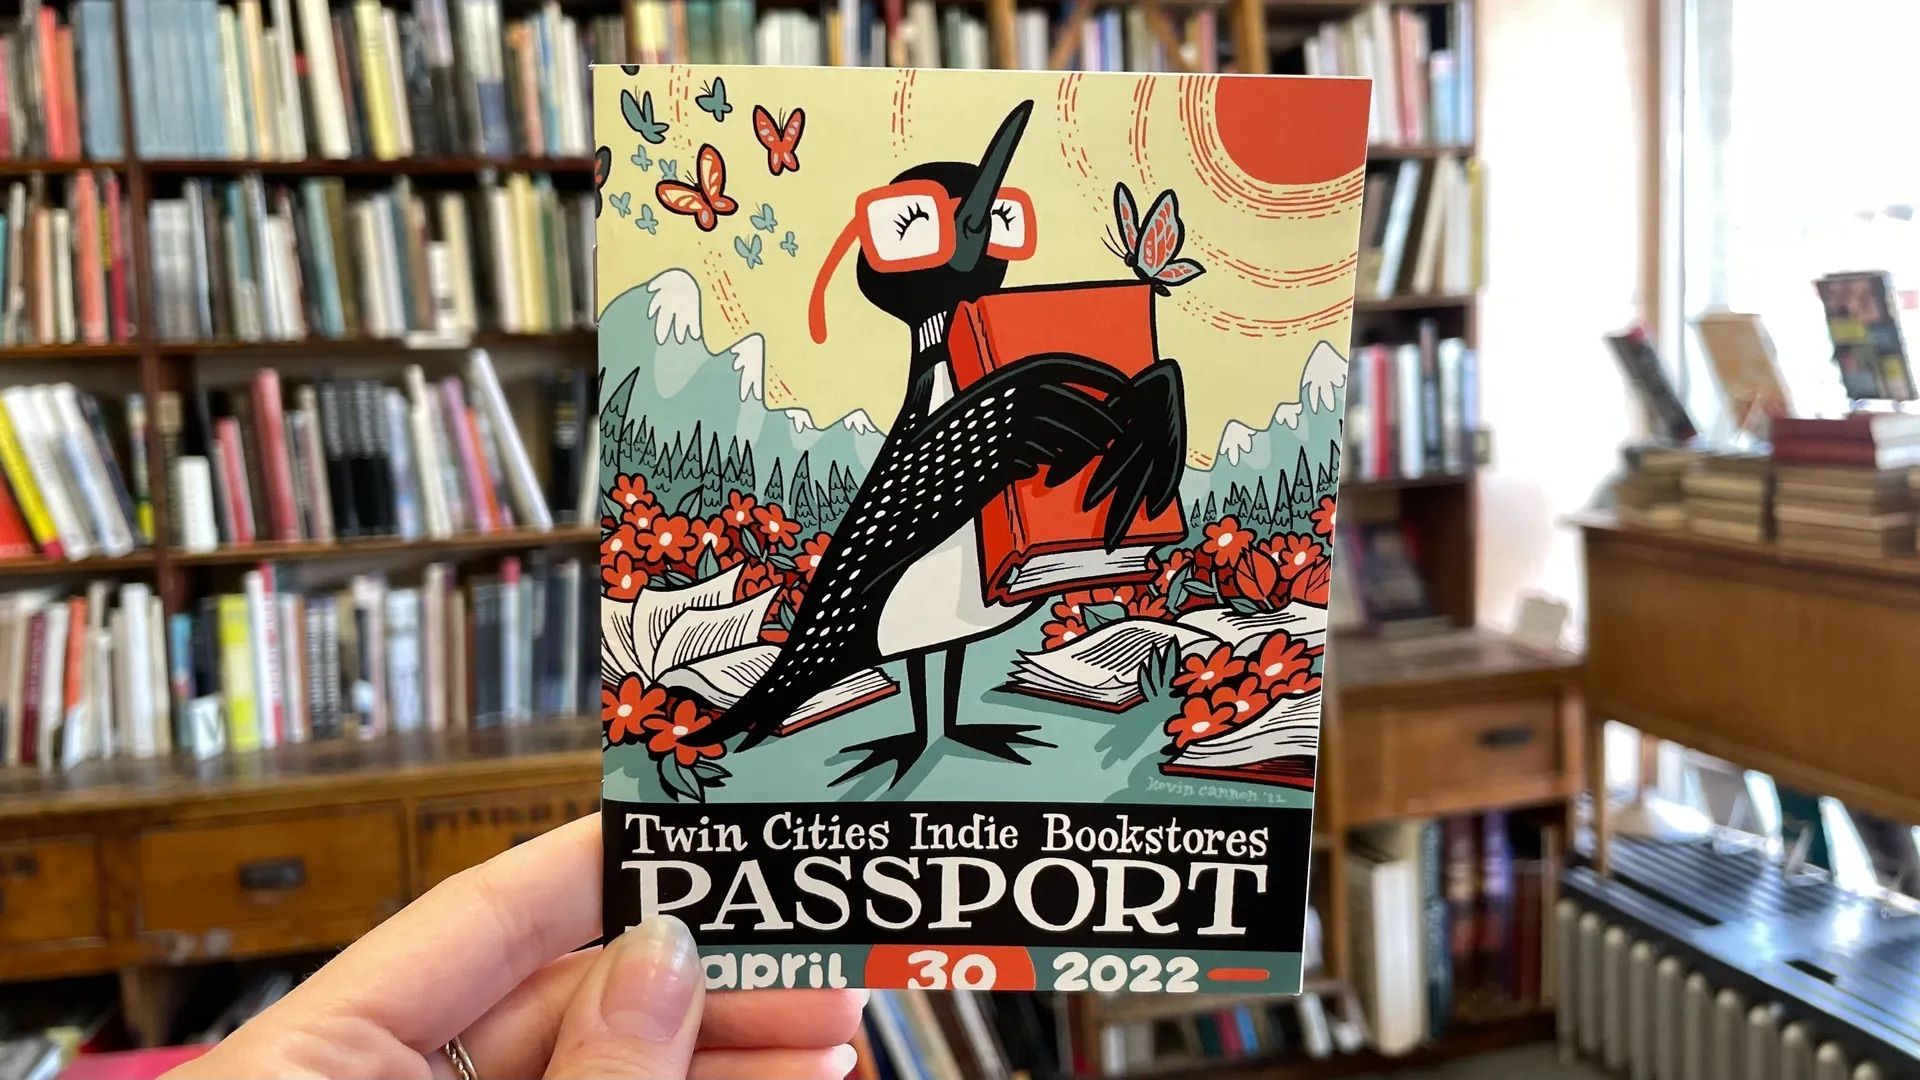 A photo of the Indie Bookstore Passport, which has a full-color drawing of a happy bird wearing glasses and holding a book. The photo's backdrop is a large bookshelf. 